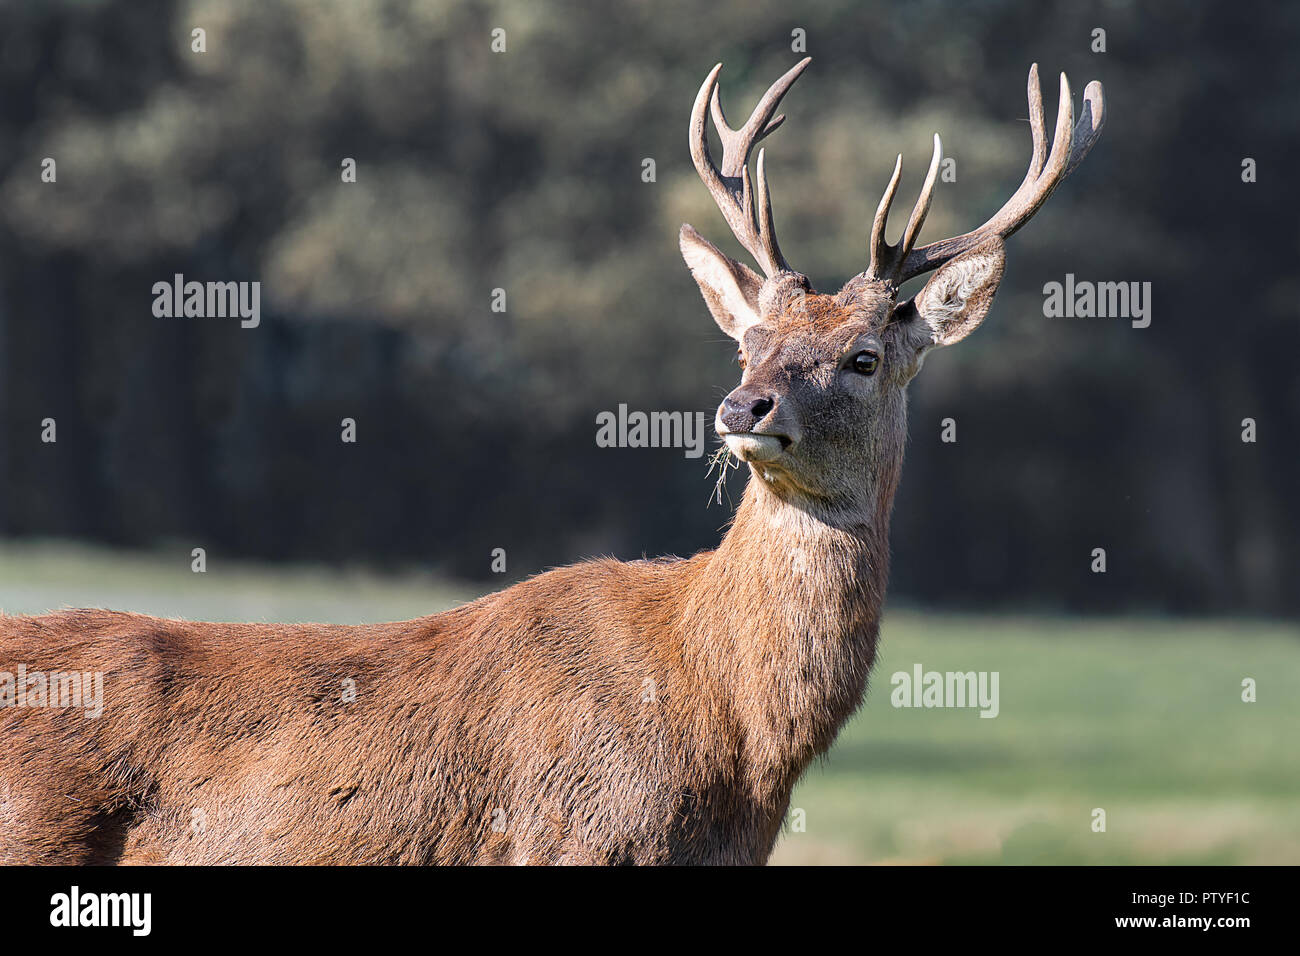 A close up portrait of a majestic looking red deer stag. Standing proud and looking slightly left into copy space Stock Photo